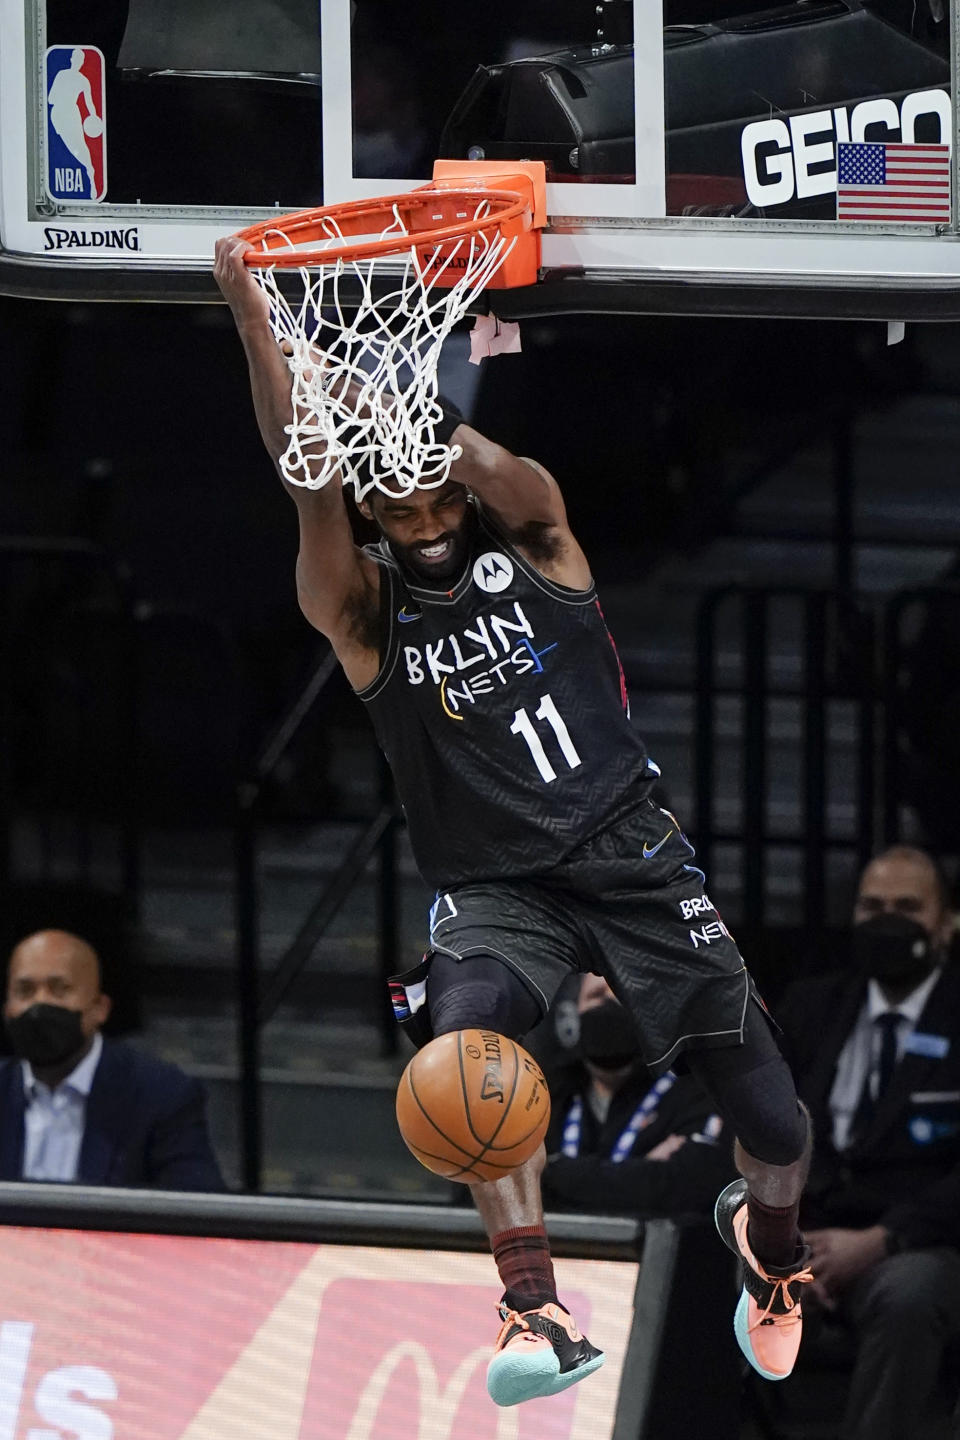 Brooklyn Nets' Kyrie Irving (11) dunks the ball during the second half of an NBA basketball game against the New York Knicks Monday, April 5, 2021, in New York. (AP Photo/Frank Franklin II)